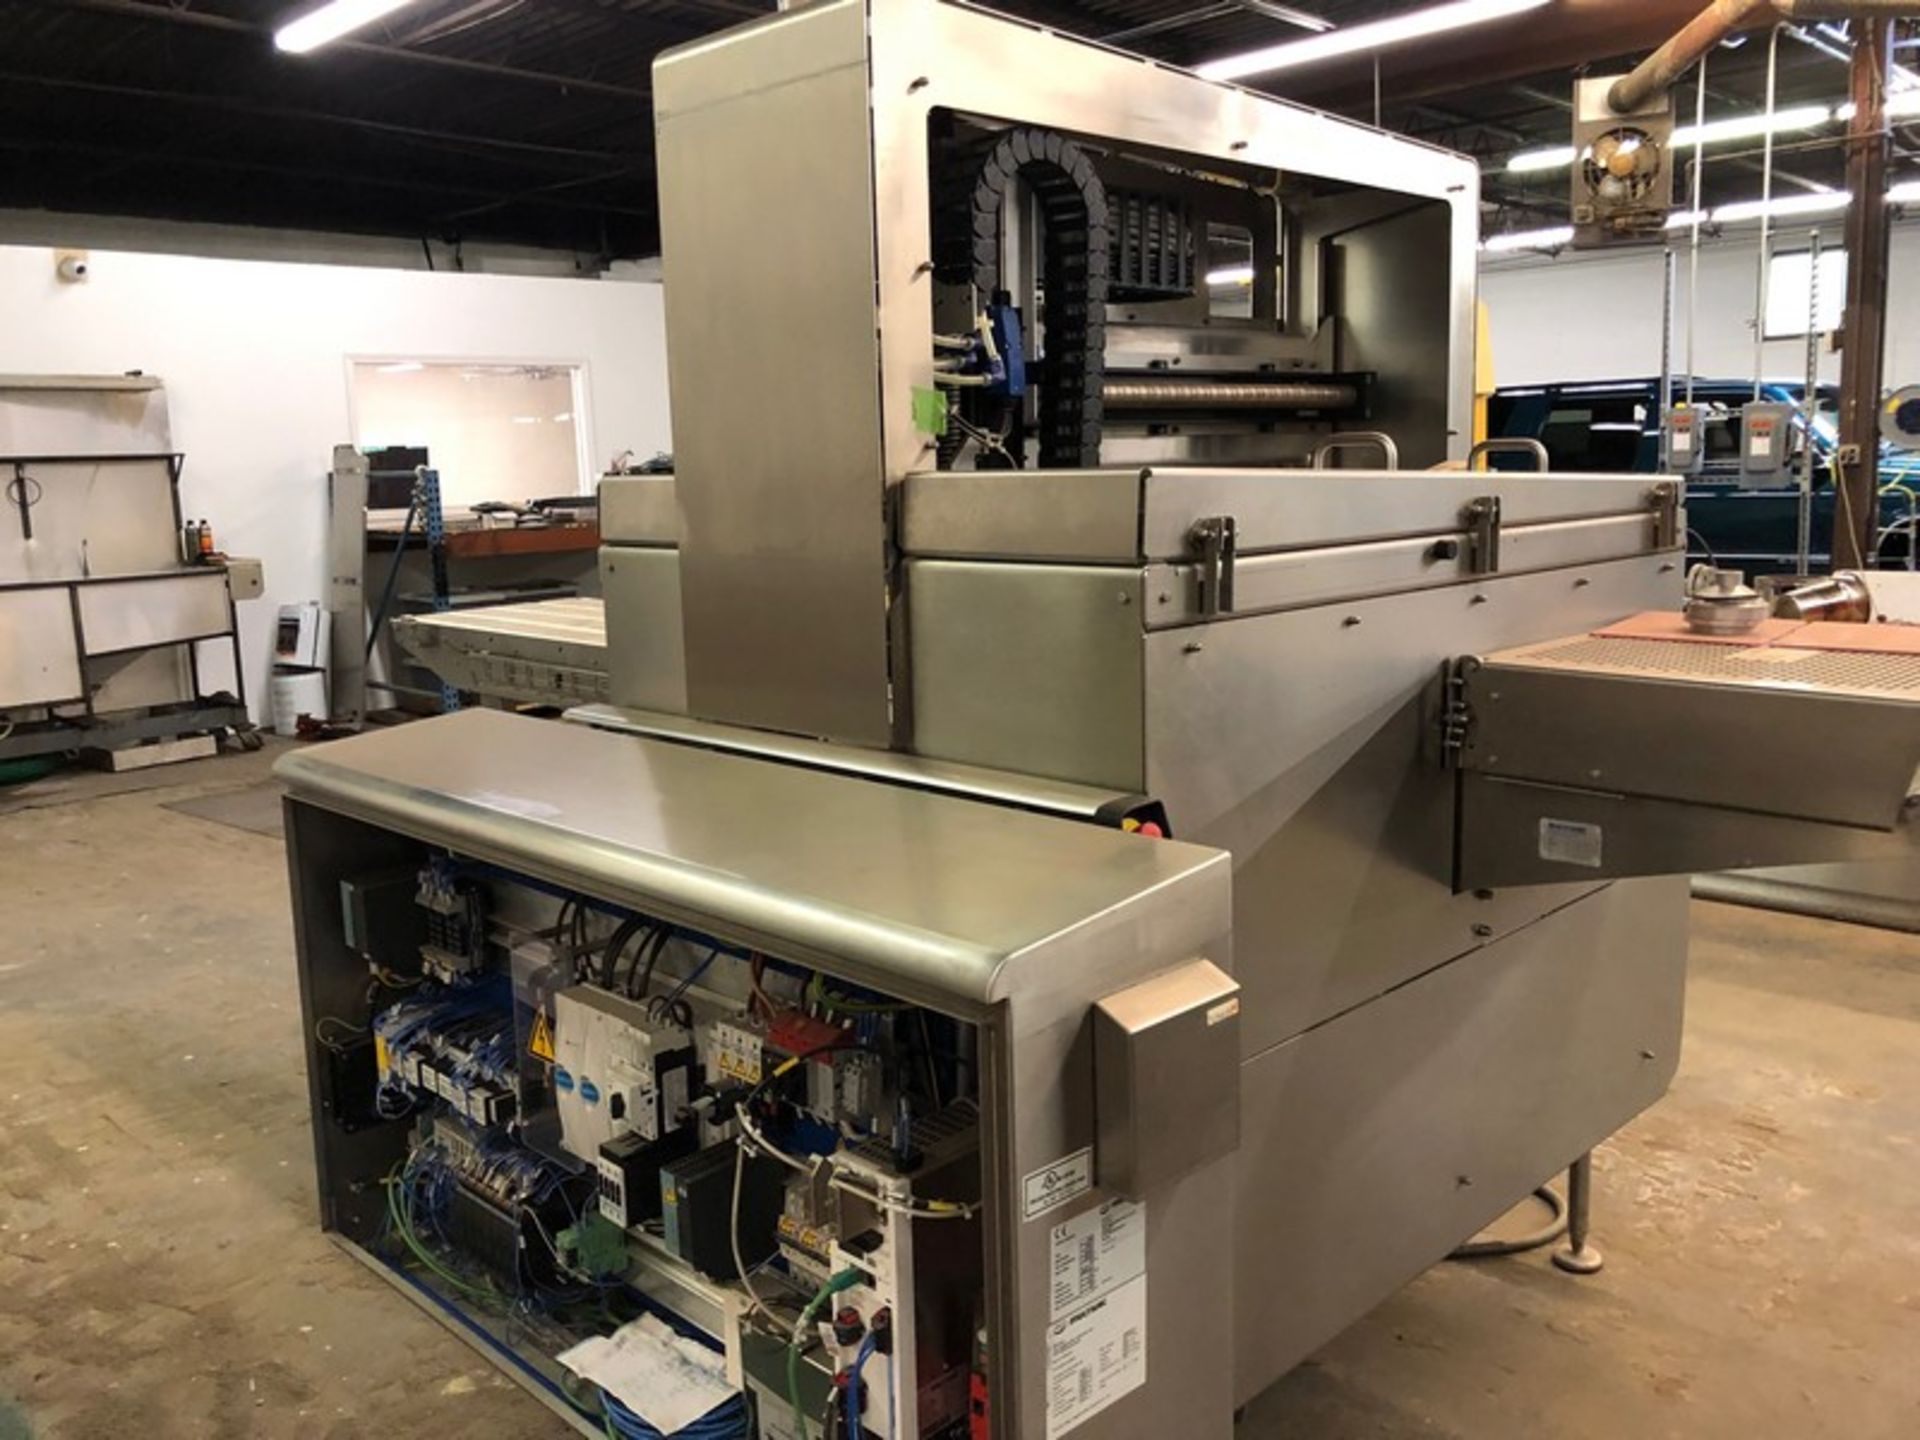 2012 MultiVac Vacuum Packager, M/N H050, S/N 158613, 208 Volts, 1 Phase (LOCATED IN BELTSVILLE, MD) - Bild 9 aus 10